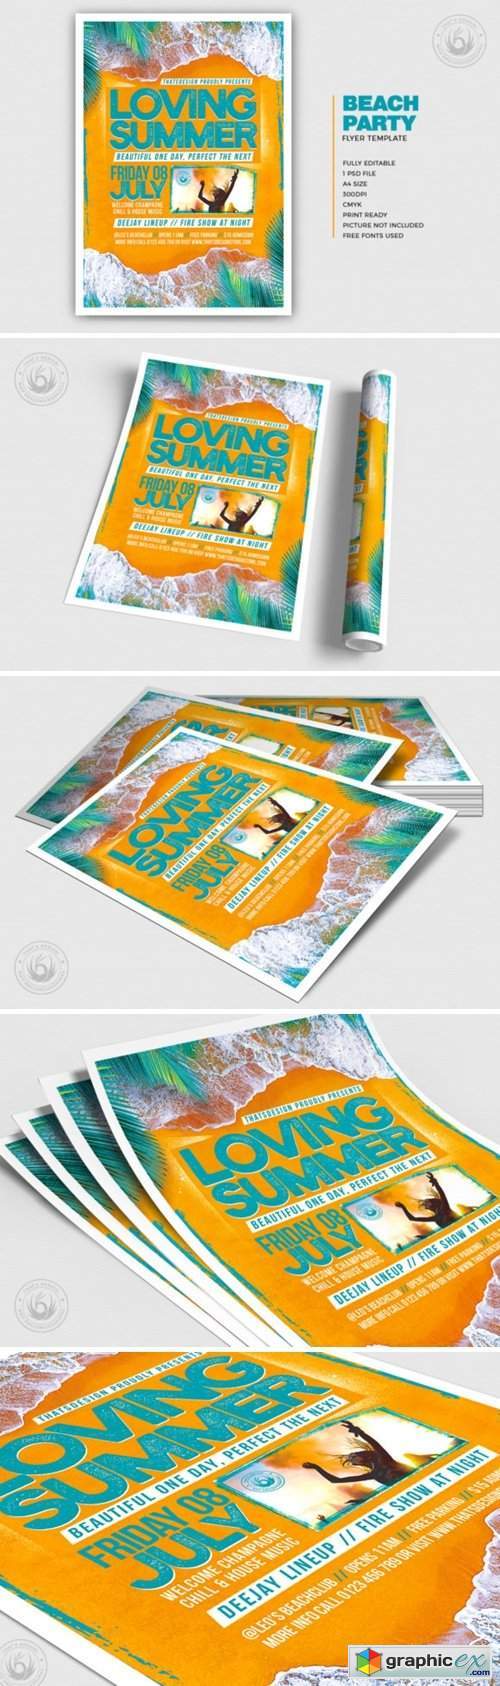 Beach Party Flyer Template V9